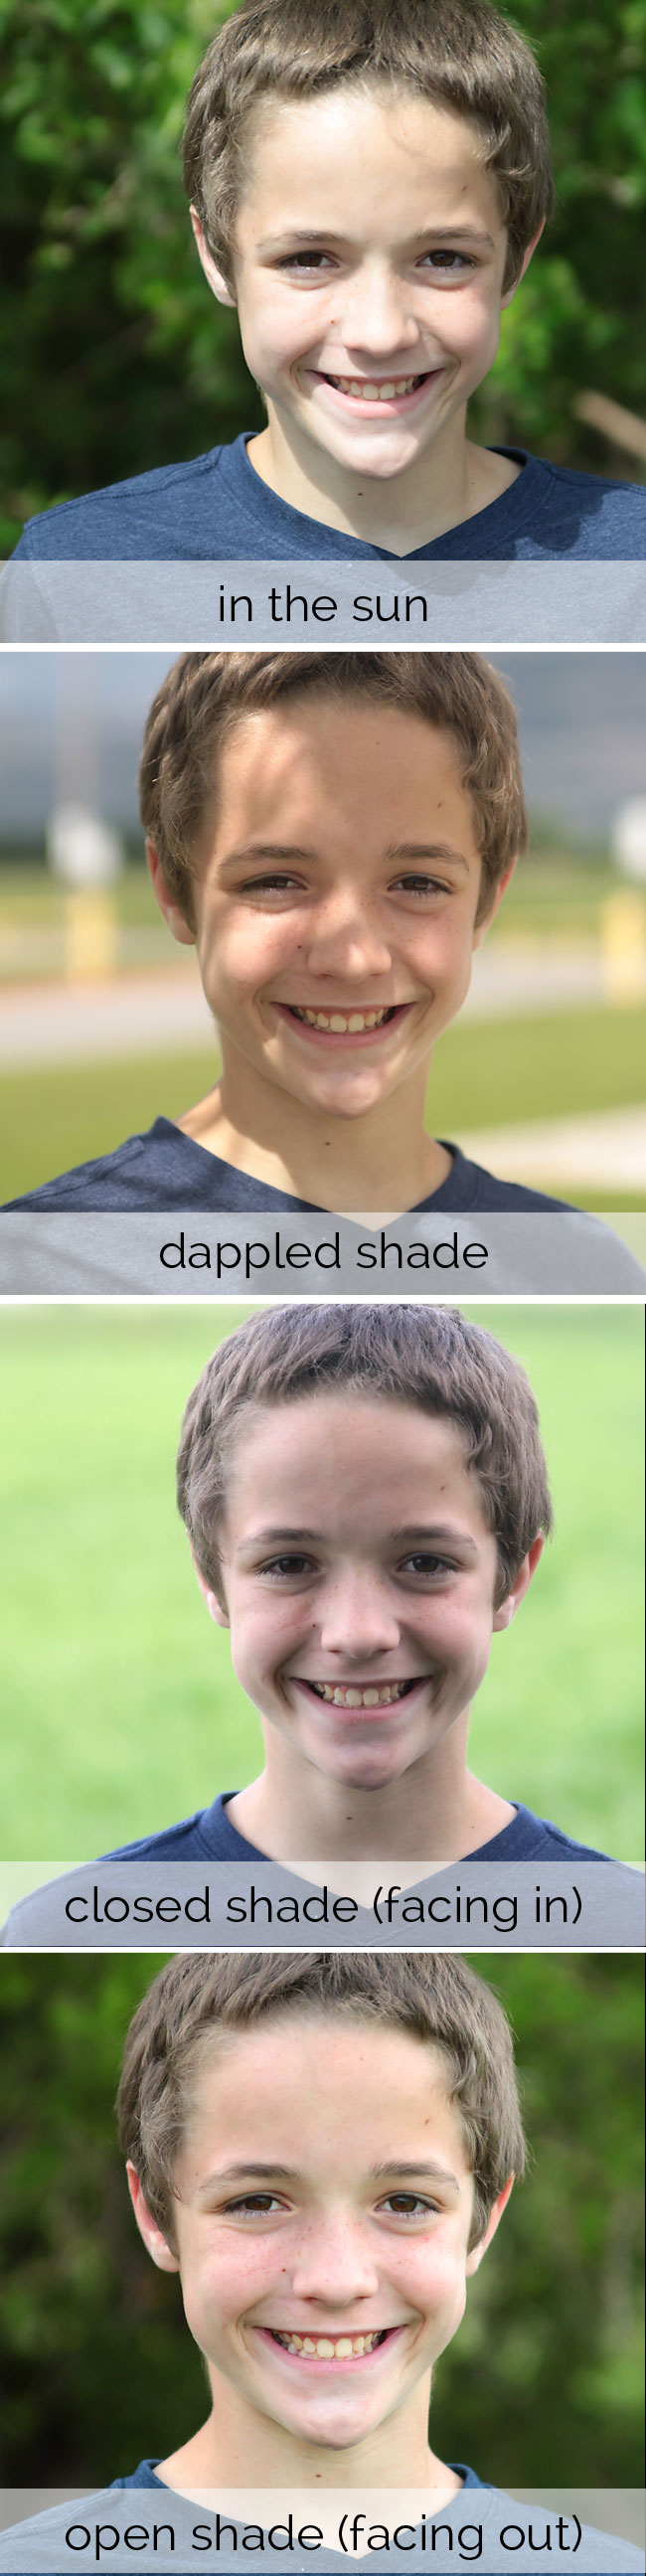 A young boy outside in full sun, dapple shade, closed shade, and open shade